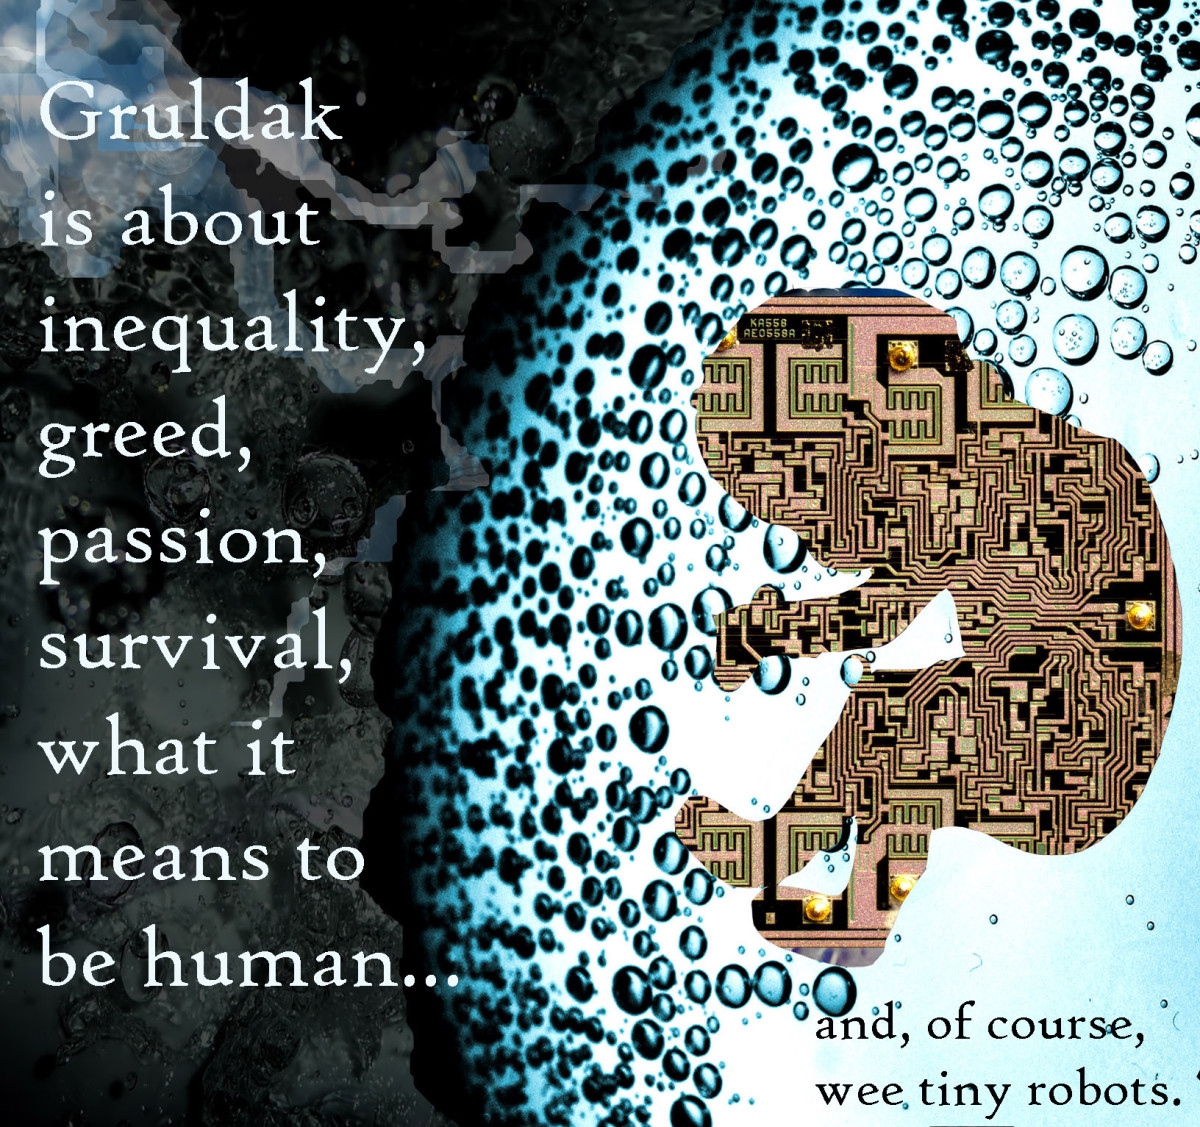 Circuit board fetus in a water bubble floating in space, an illustration for Gift of the Gruldak, a serialized science fiction novel you can read free online.